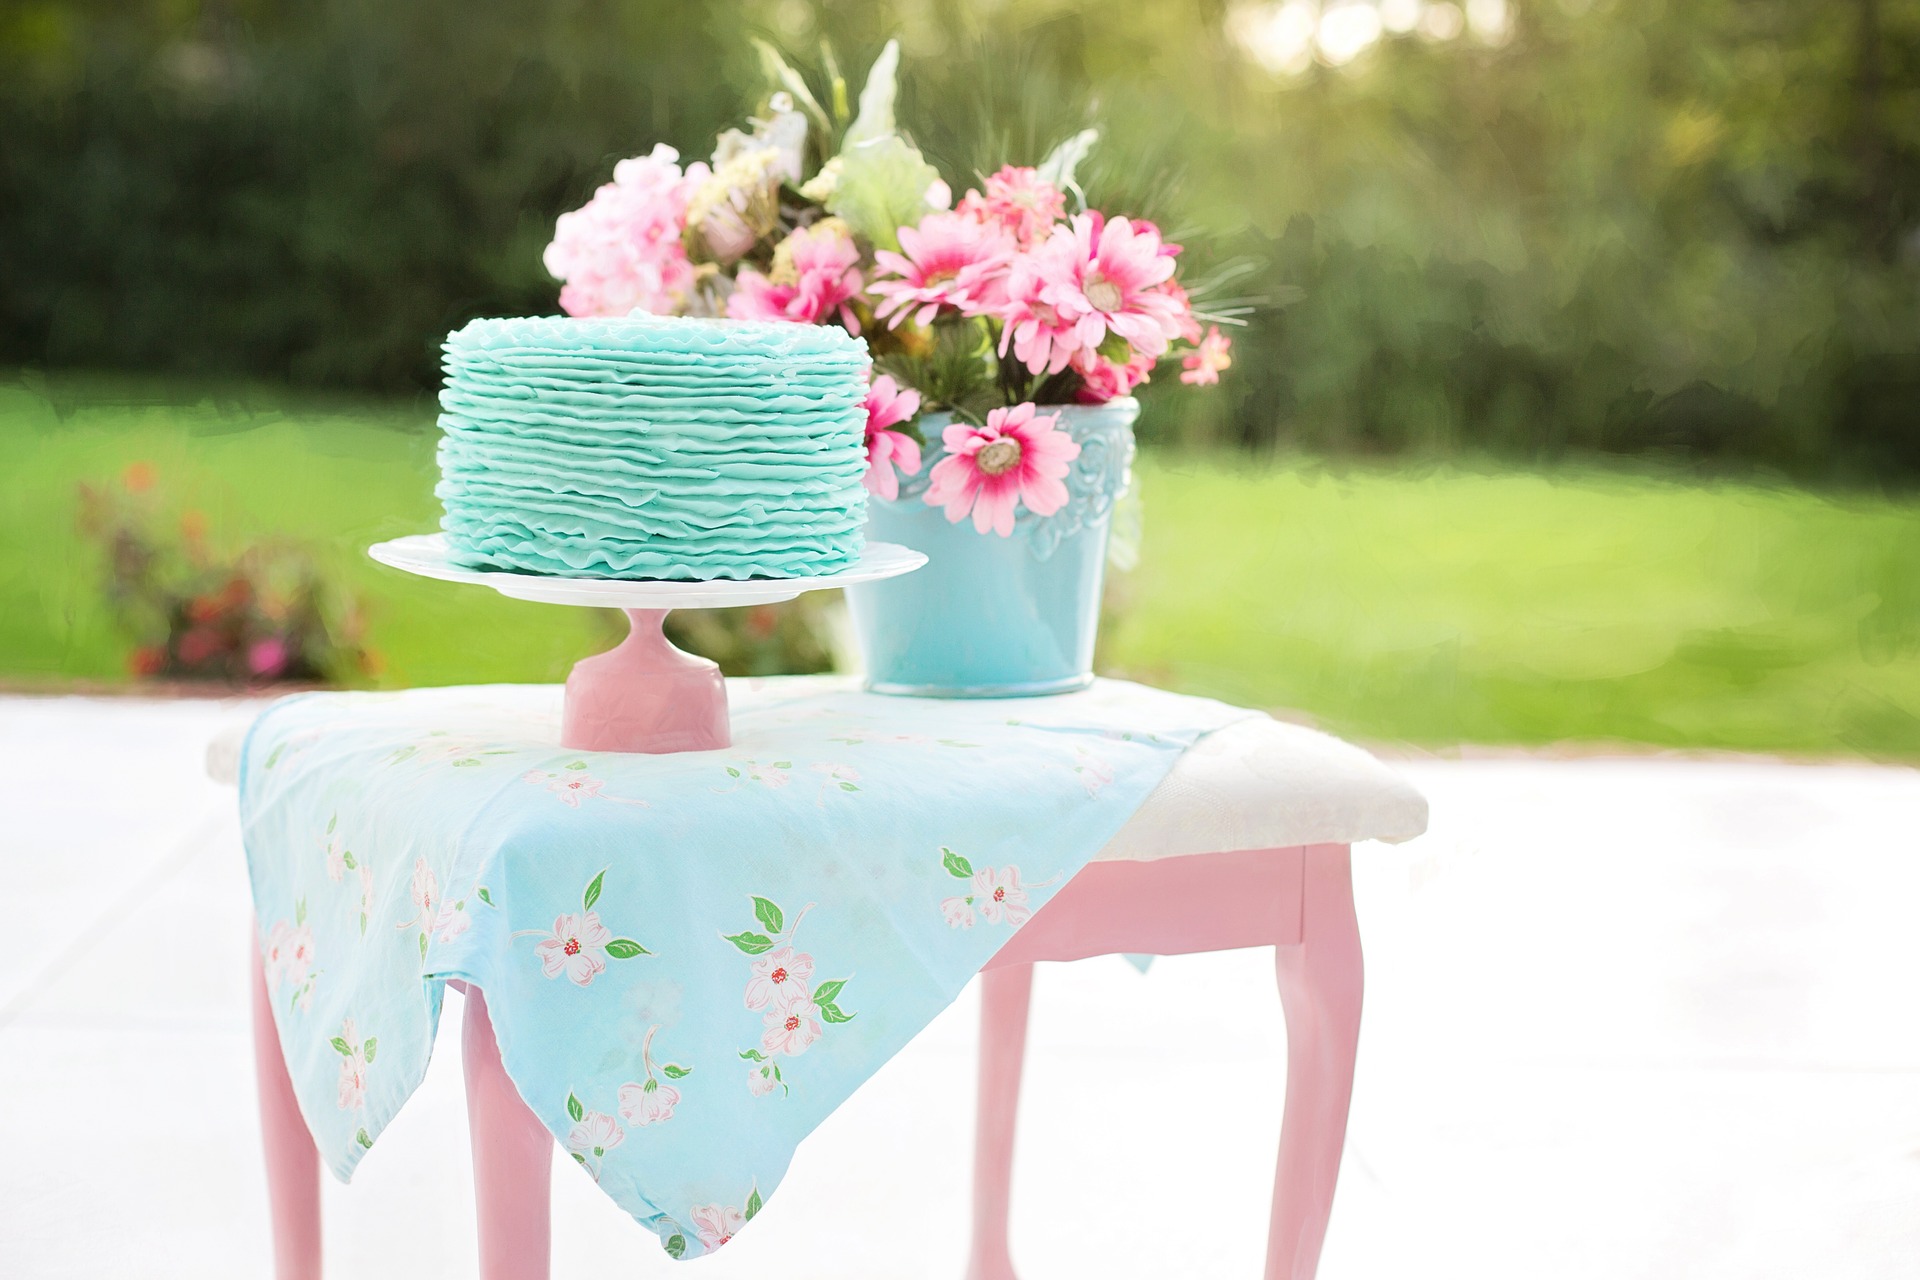 A single tier birthday cake with teal blue icing sits on a cake platter, posed on a pink and white bench with a bucket full of pink flowers.